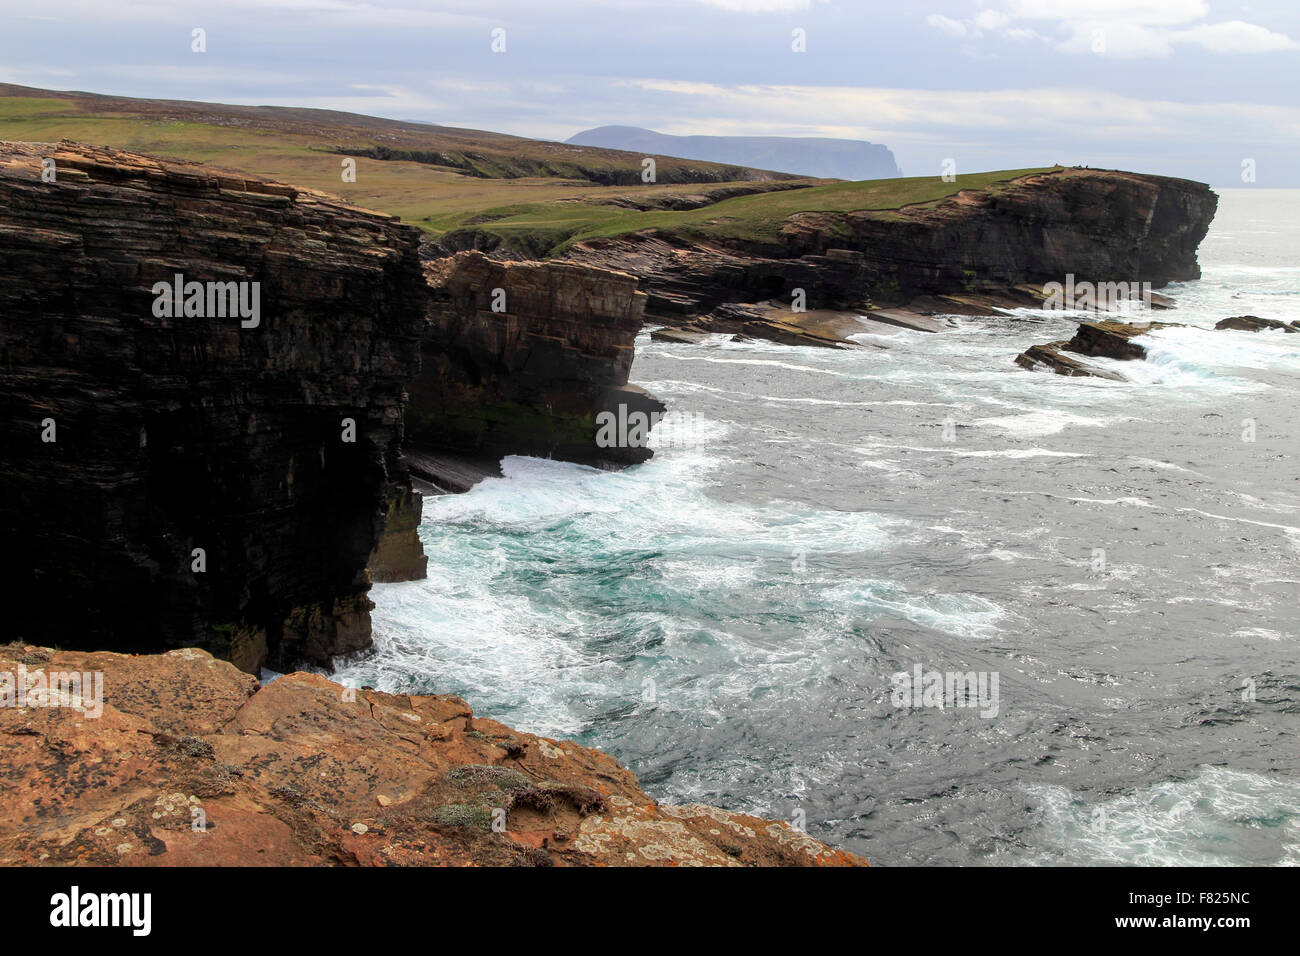 Dramatic cliffs at Yesnaby West Mainland Orkney Islands Scotland UK Stock Photo